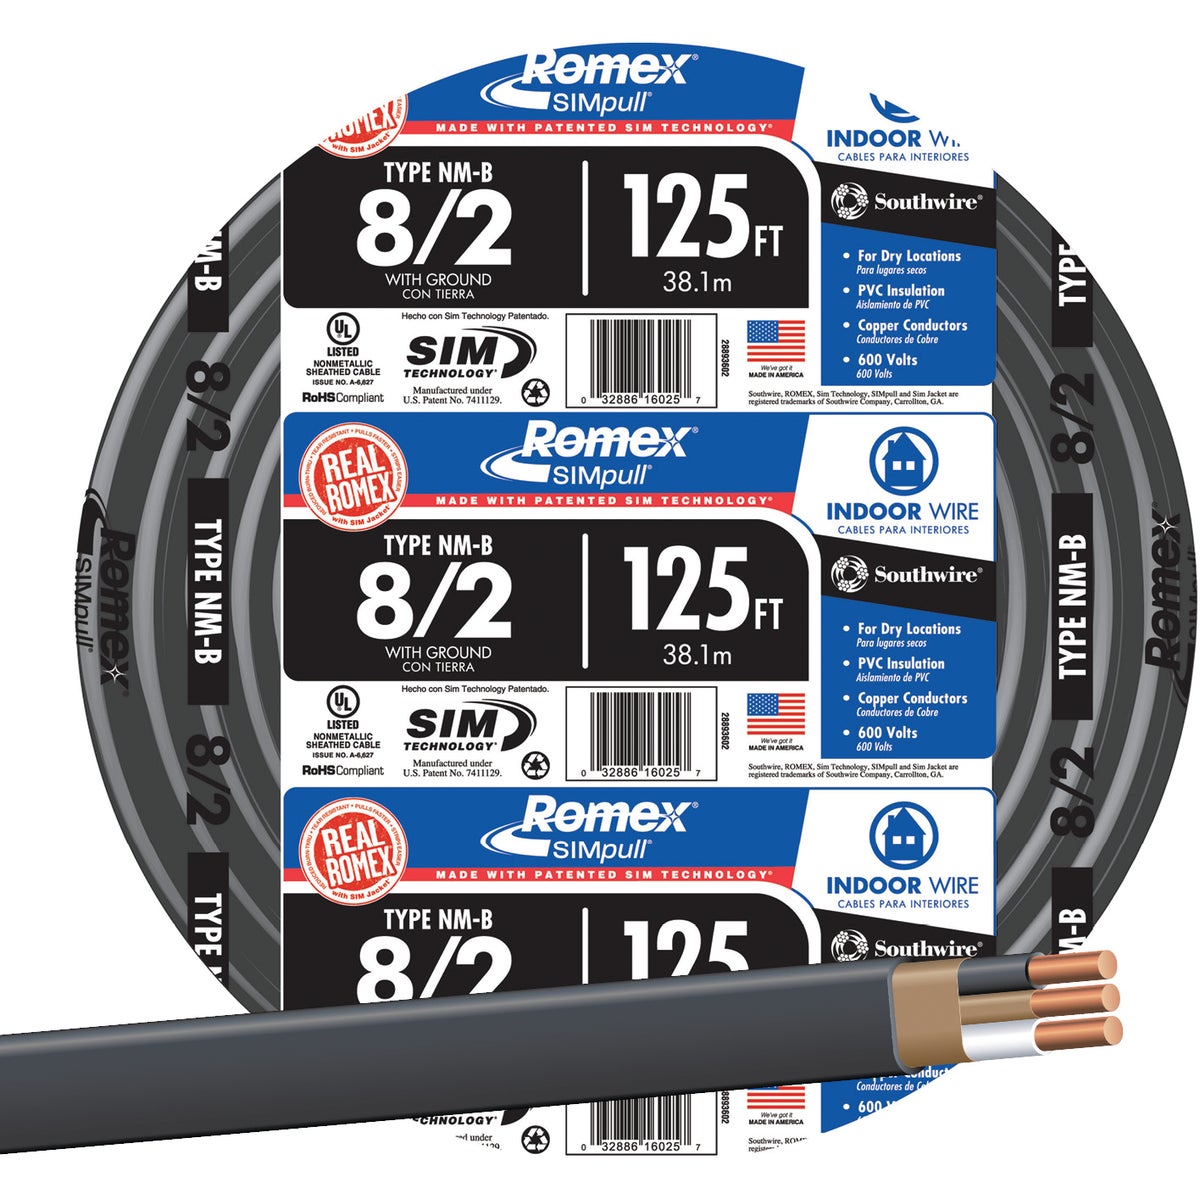 Item 533009, Type NM-B cable is designed specifically for use in residential and 